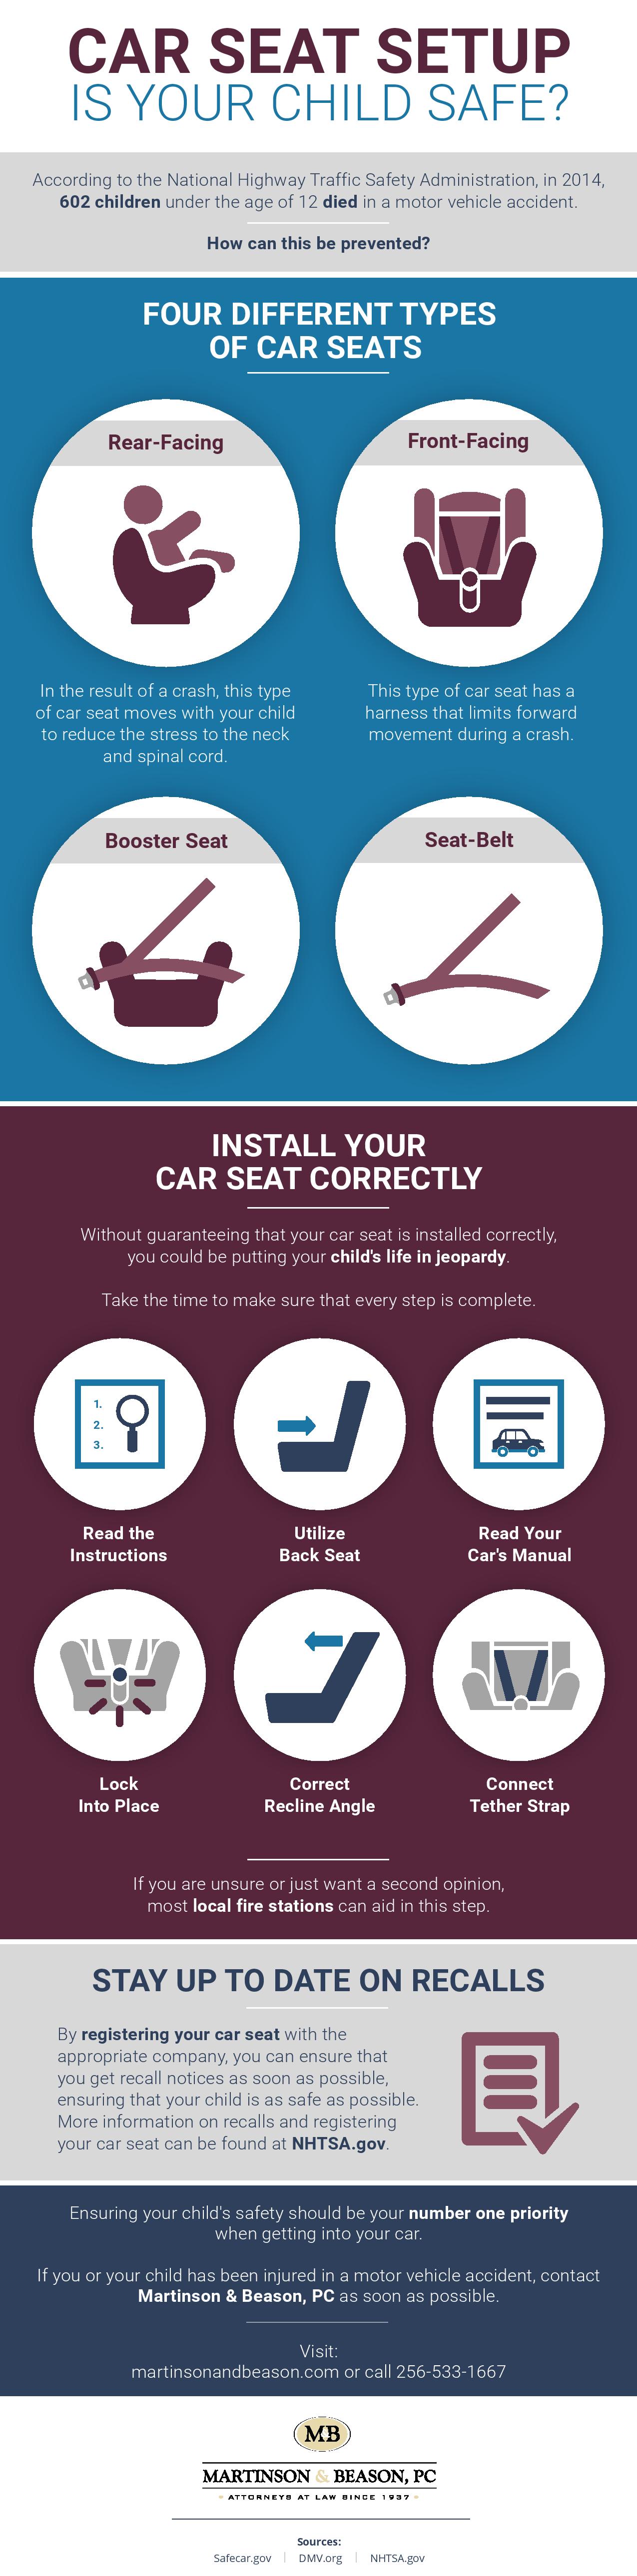 Car Accident Child Seat Safety